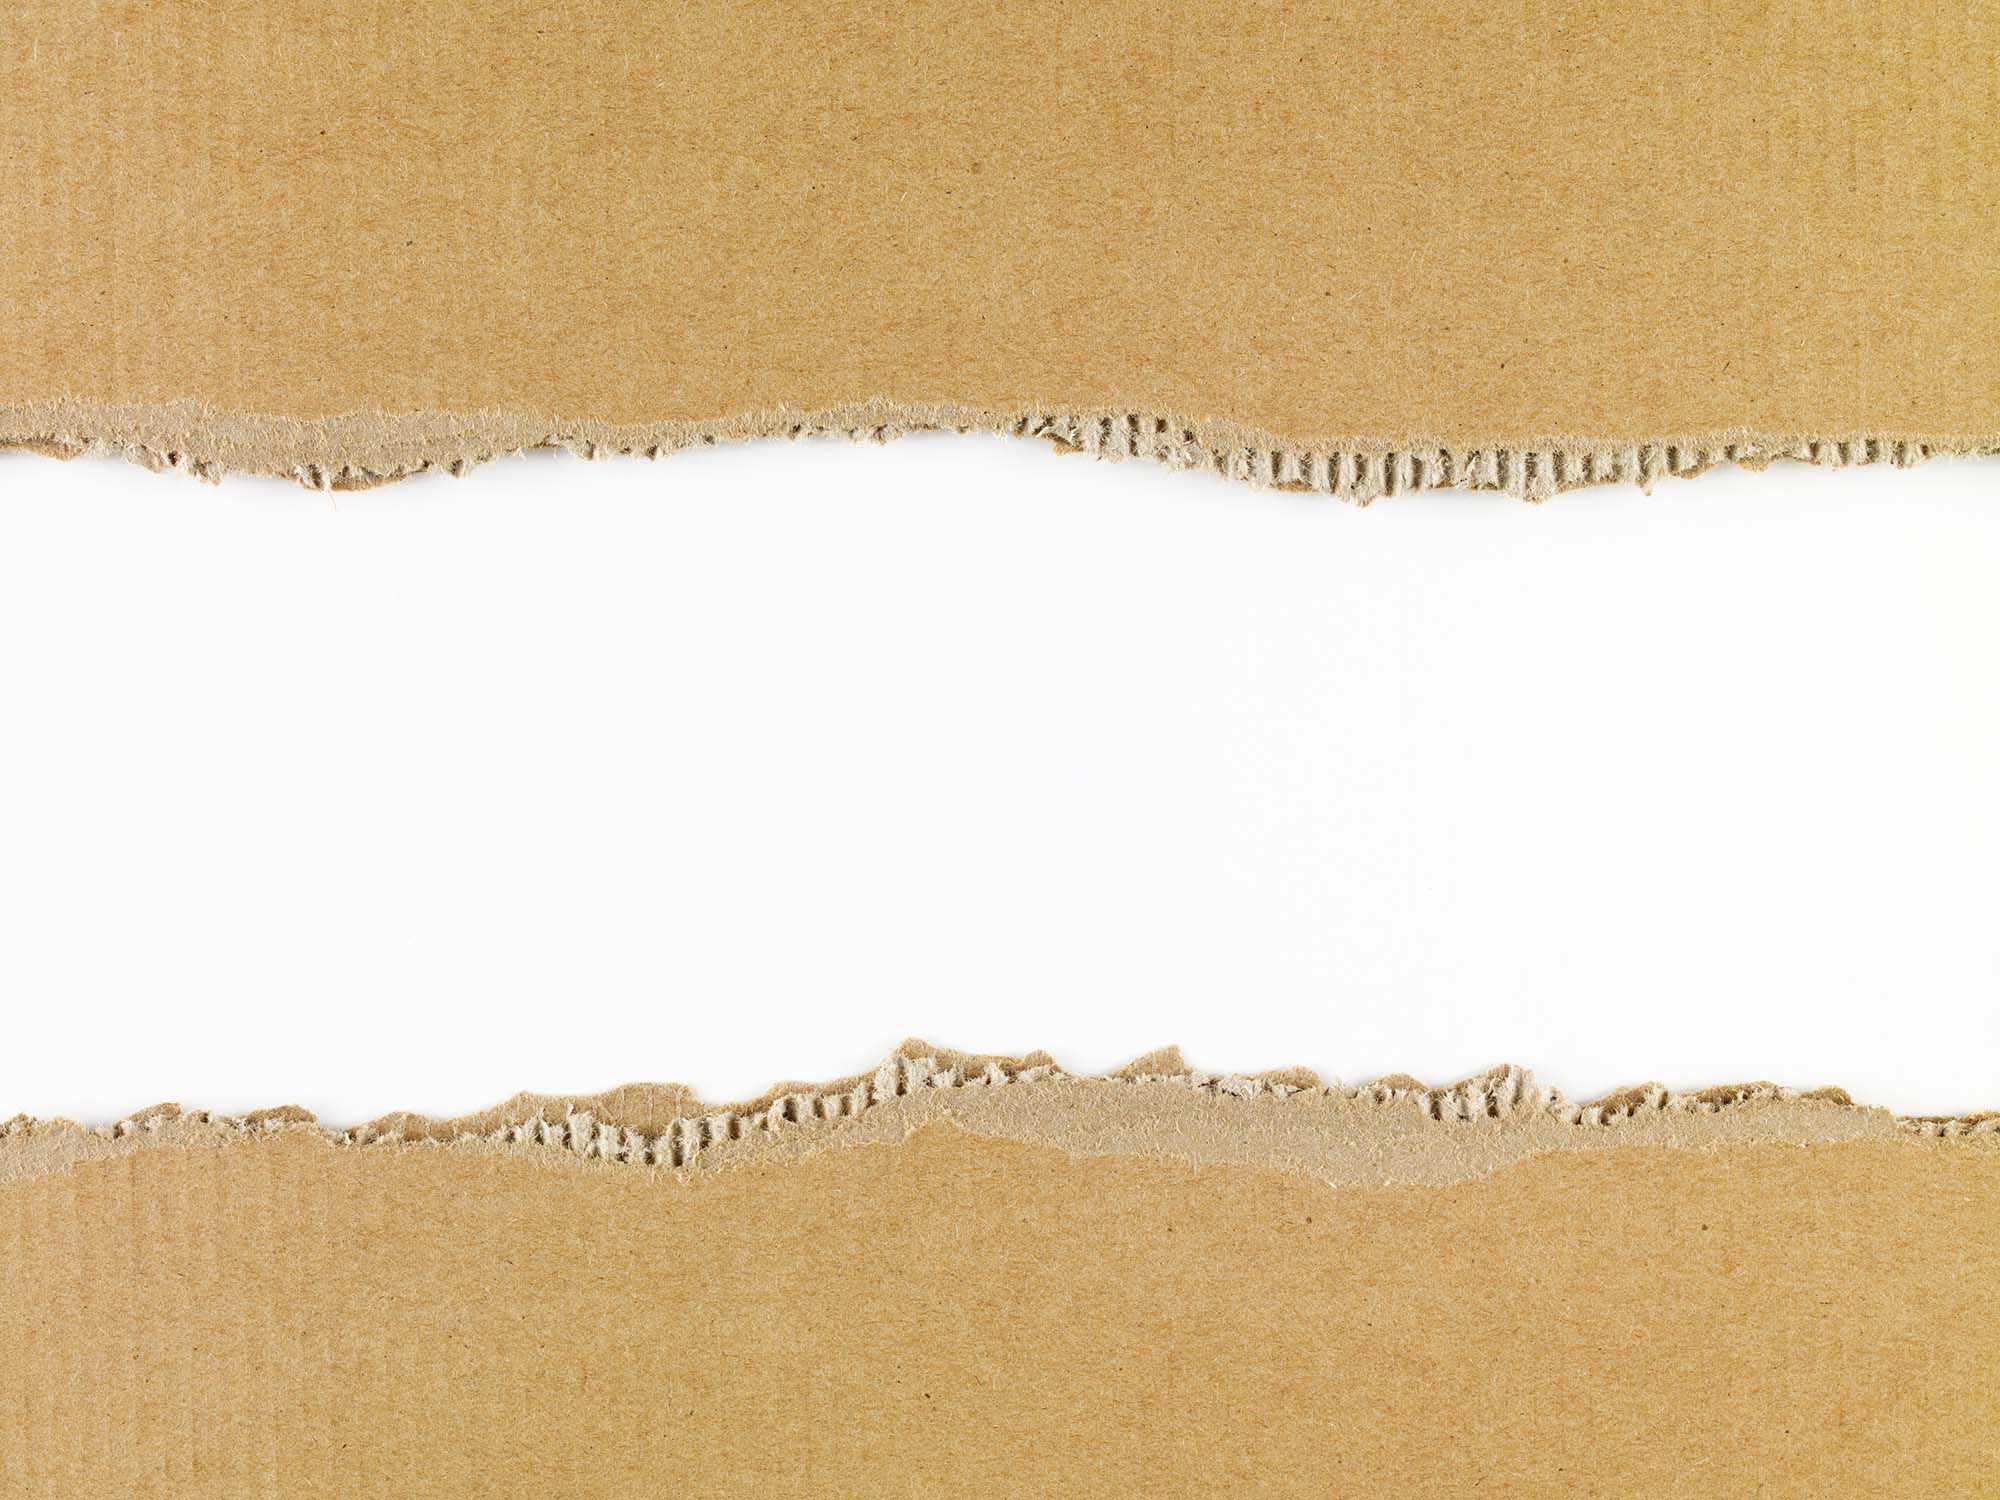 A cardboard torn into two pieces.